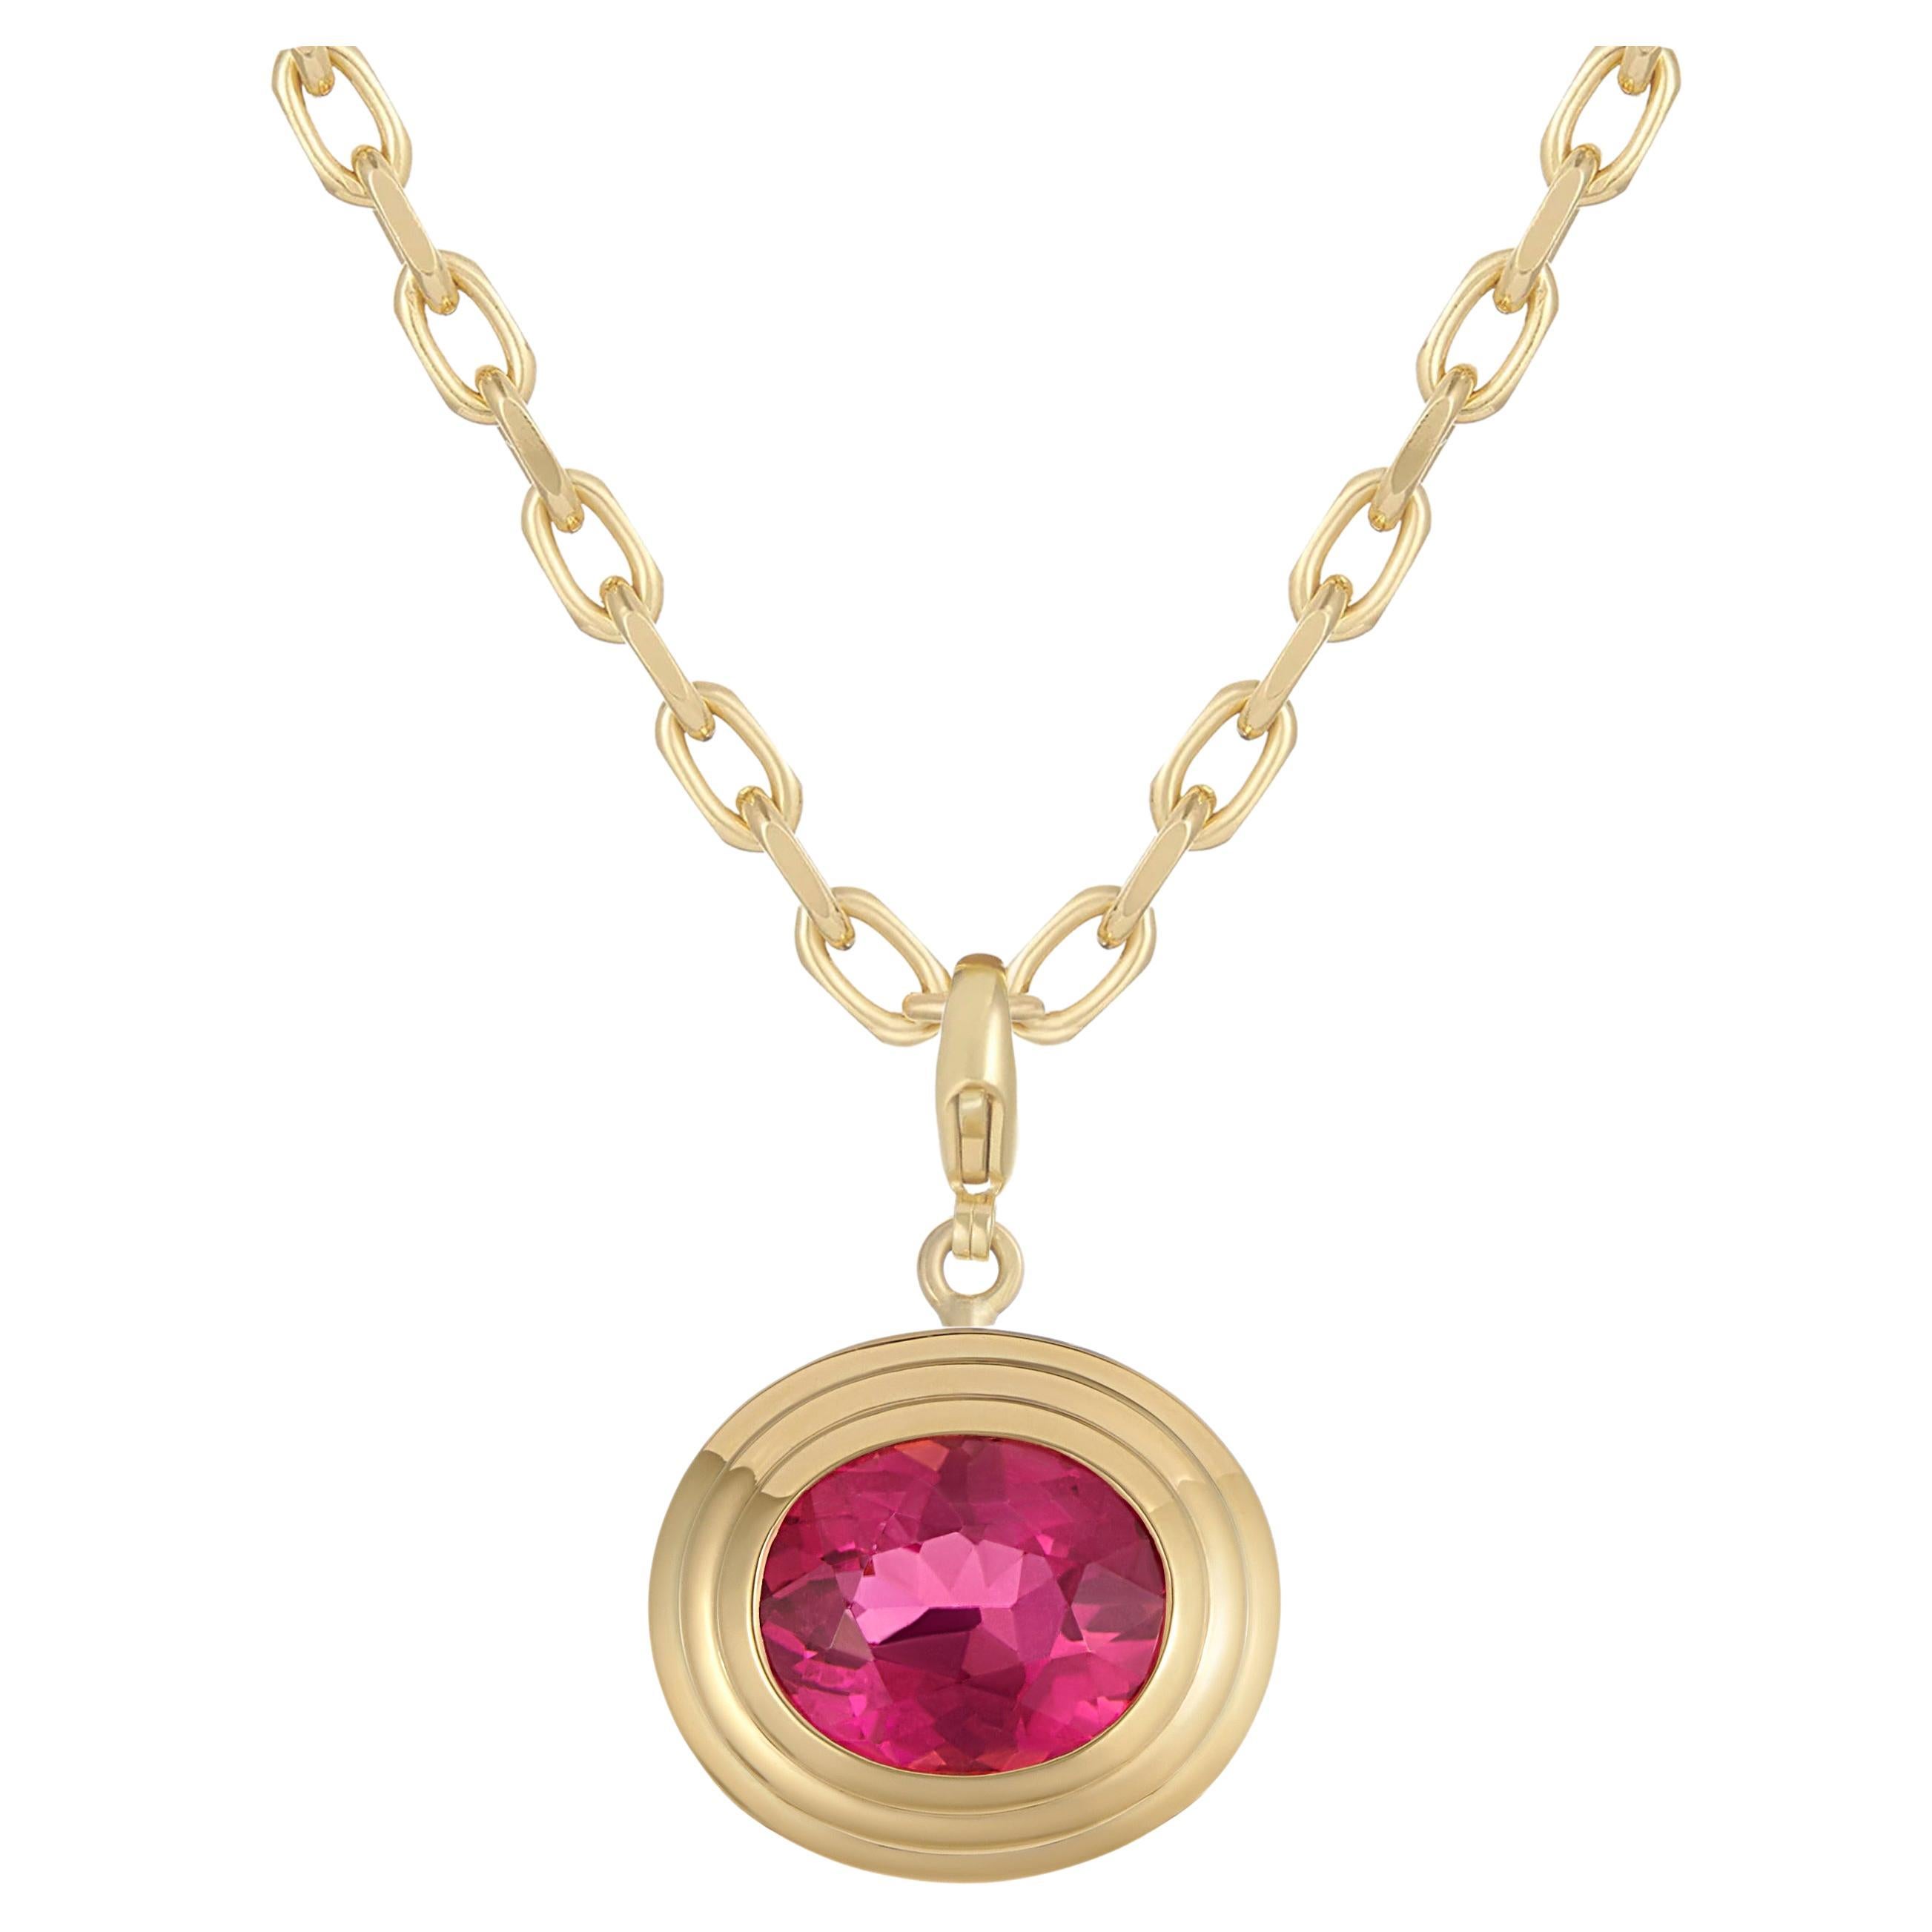 Athena: 3.75ct Oval Pink Tourmaline Pendant on Chunky Chain in 18k Yellow Gold For Sale